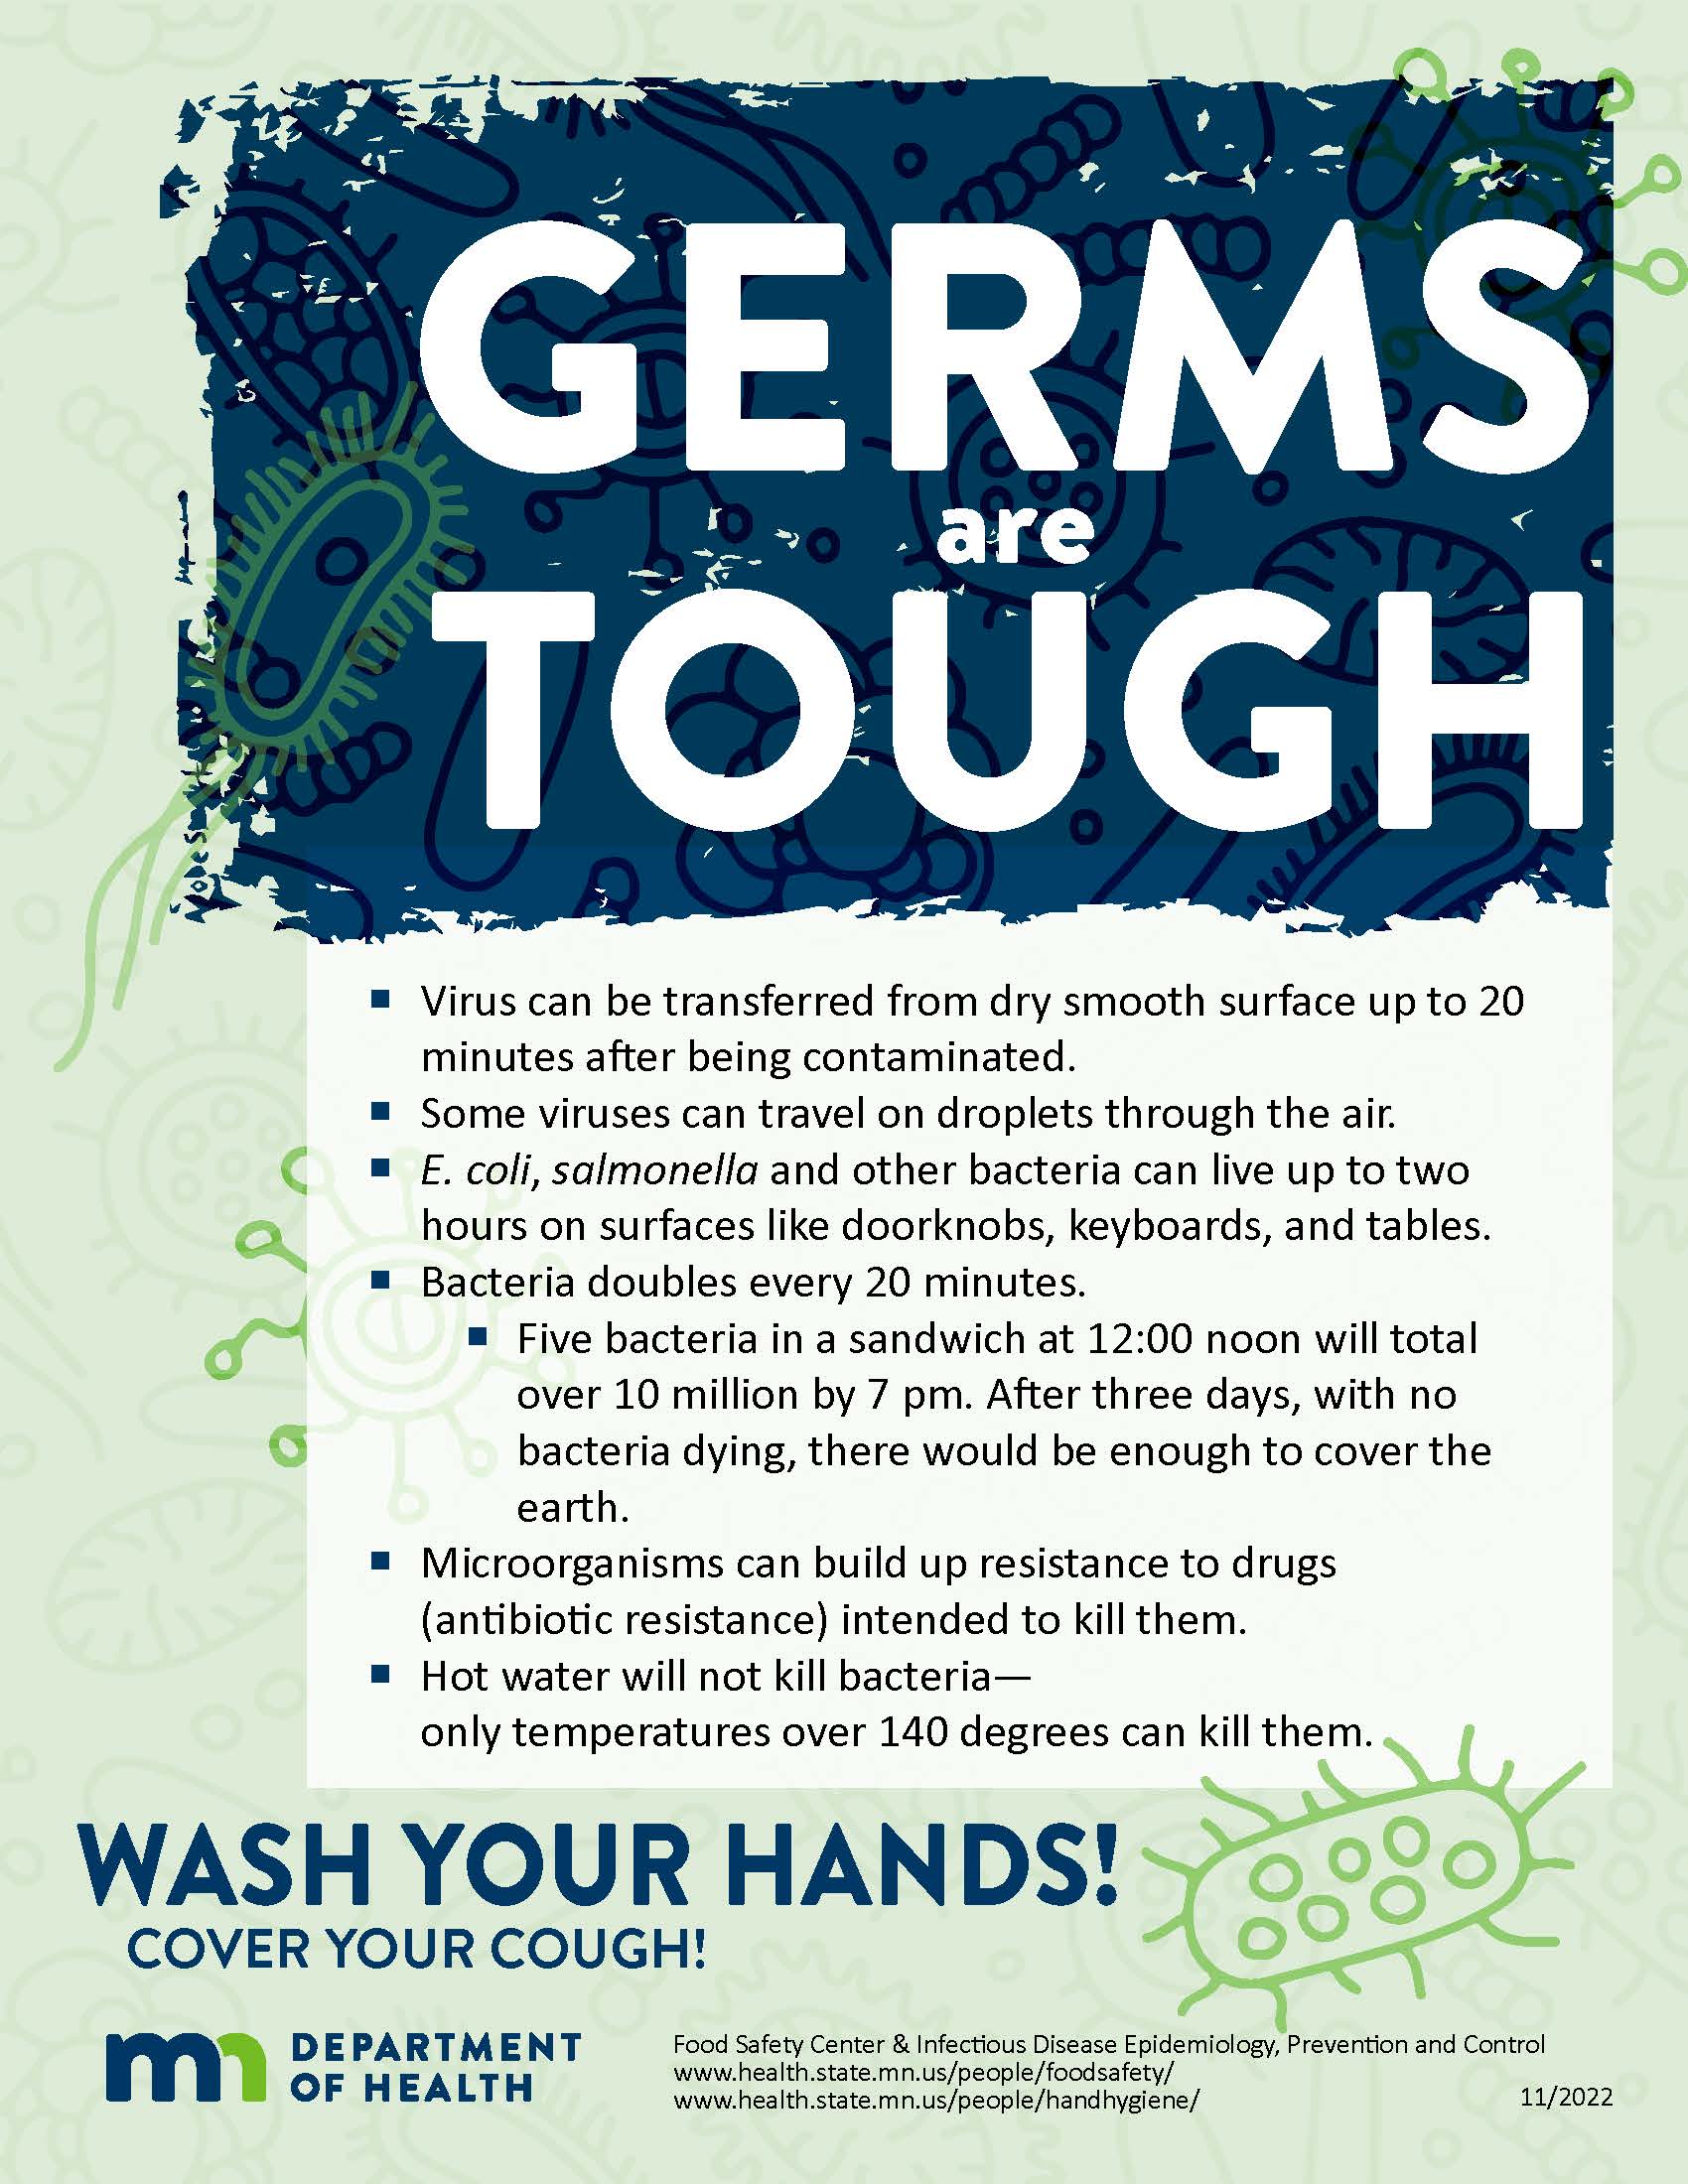 Image of Germs are Tough poster.